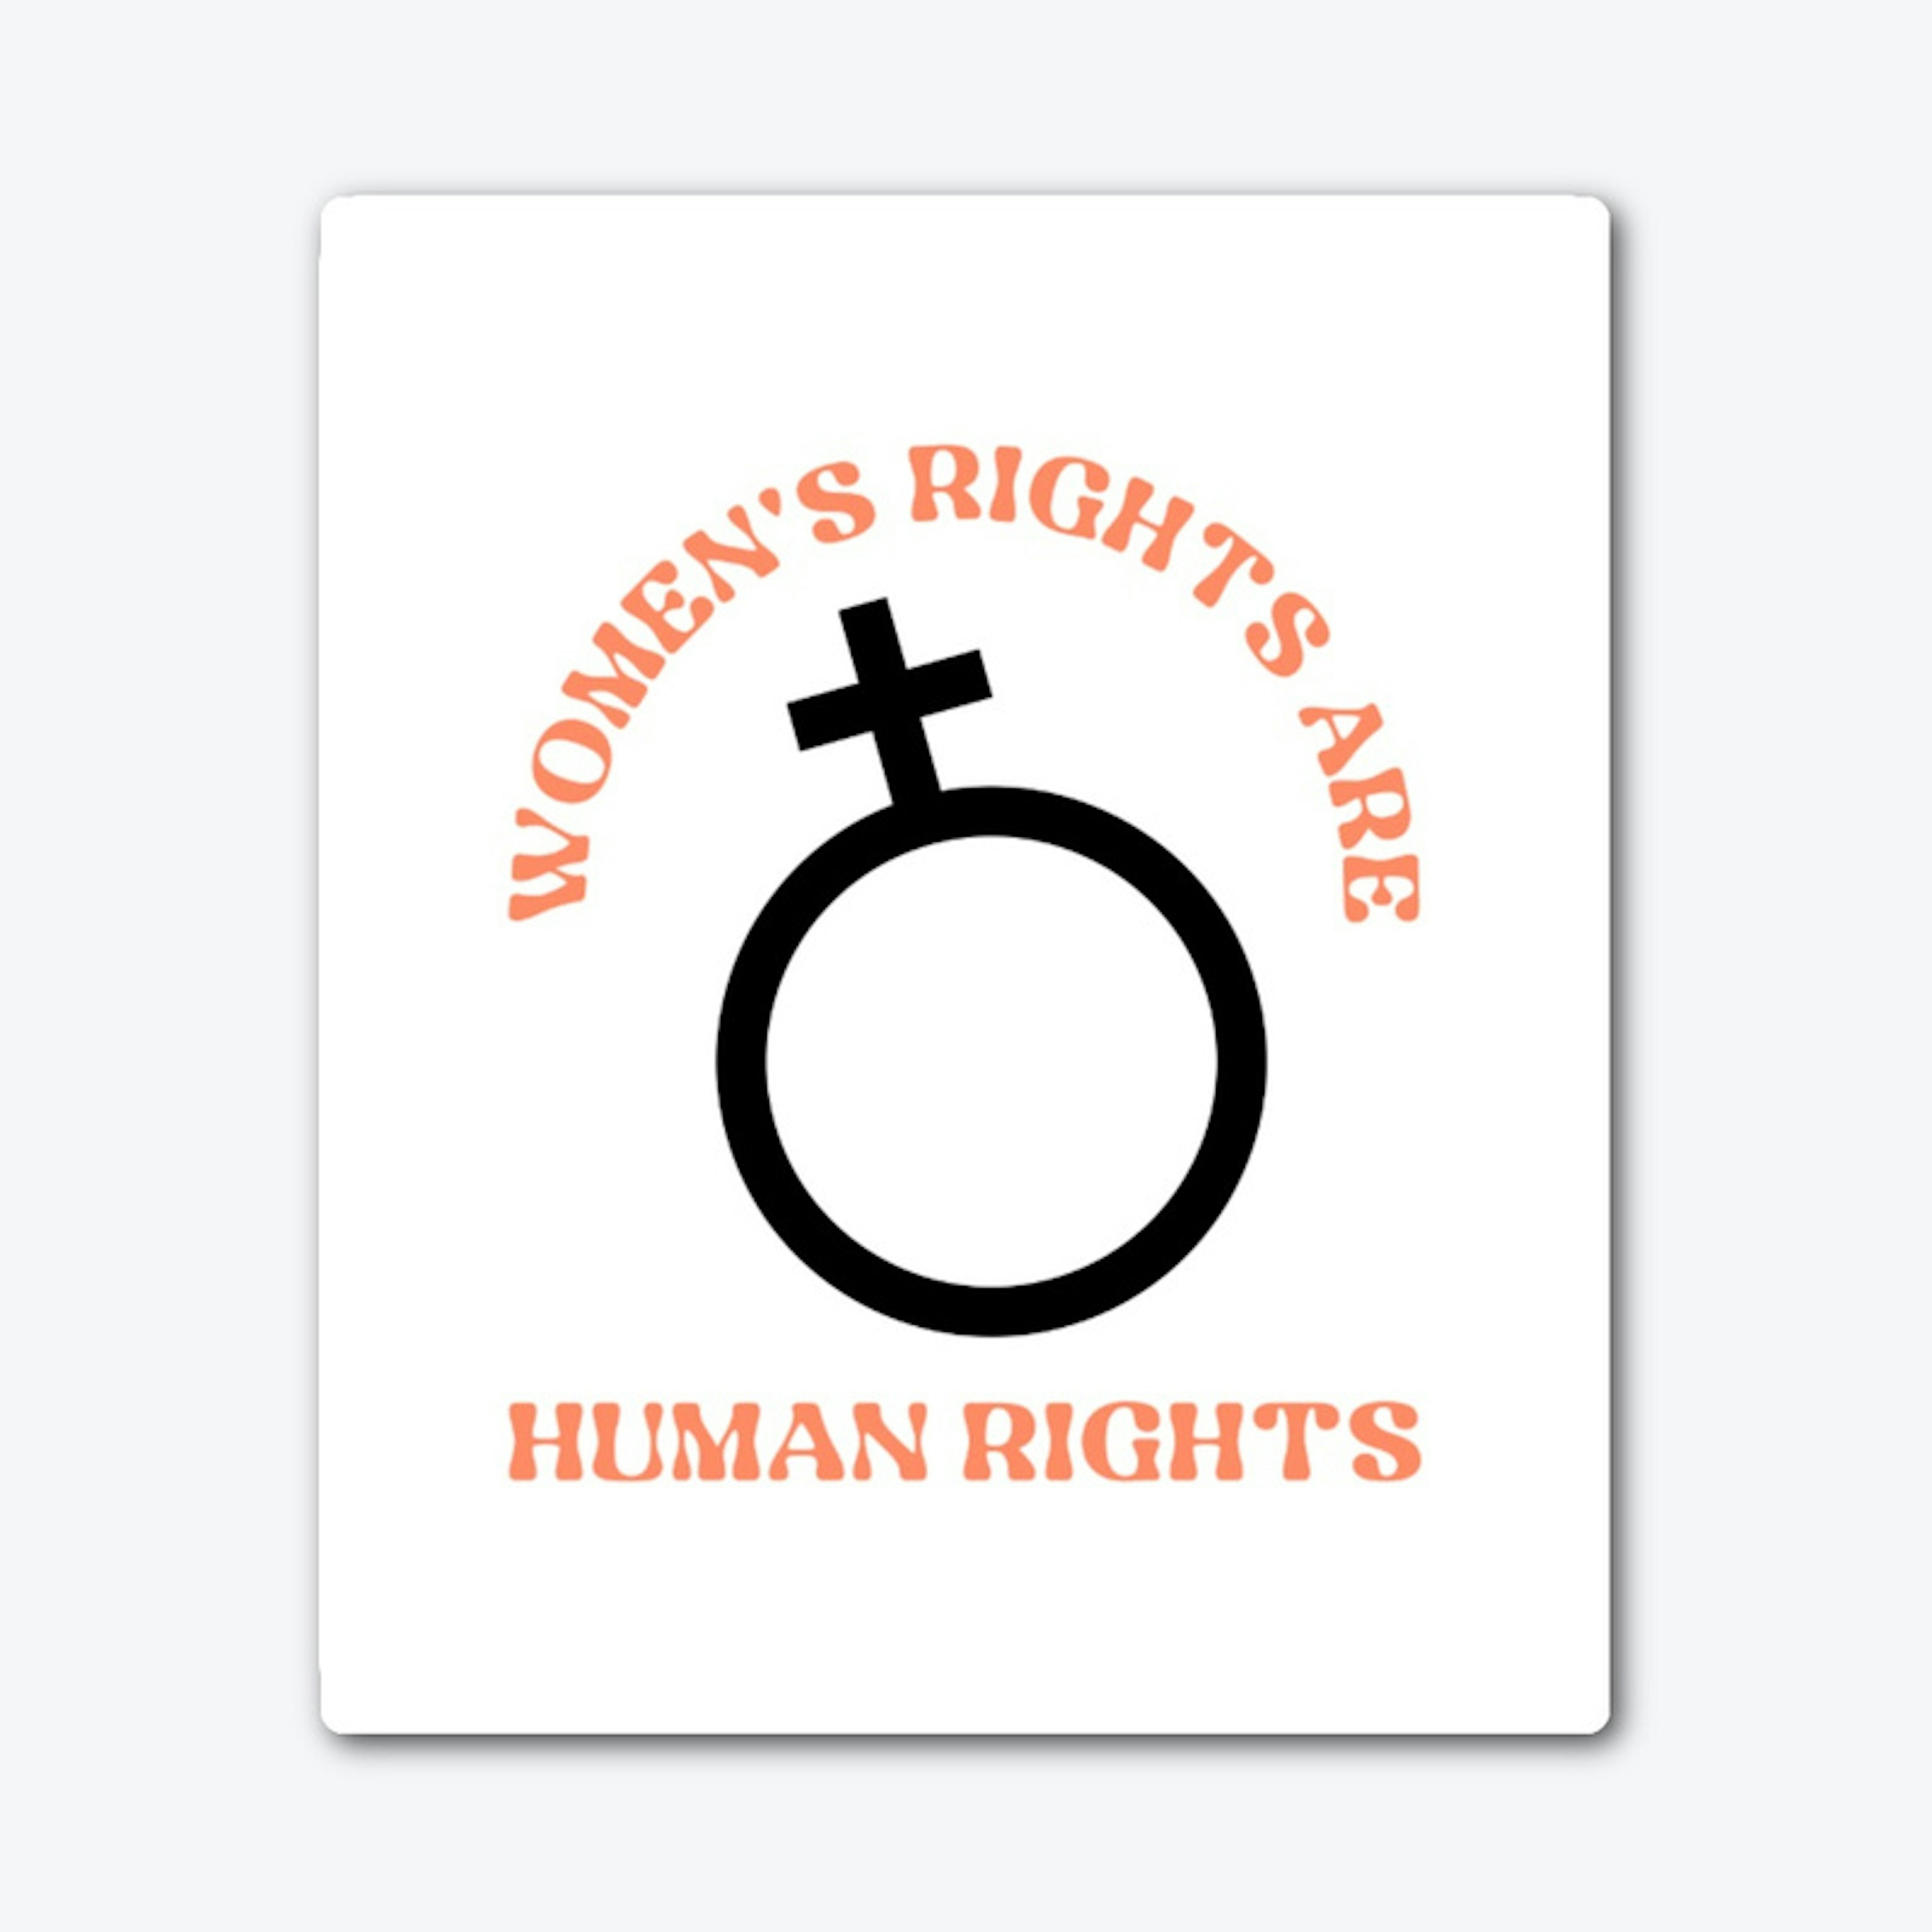 Women's Rights are Human Rights